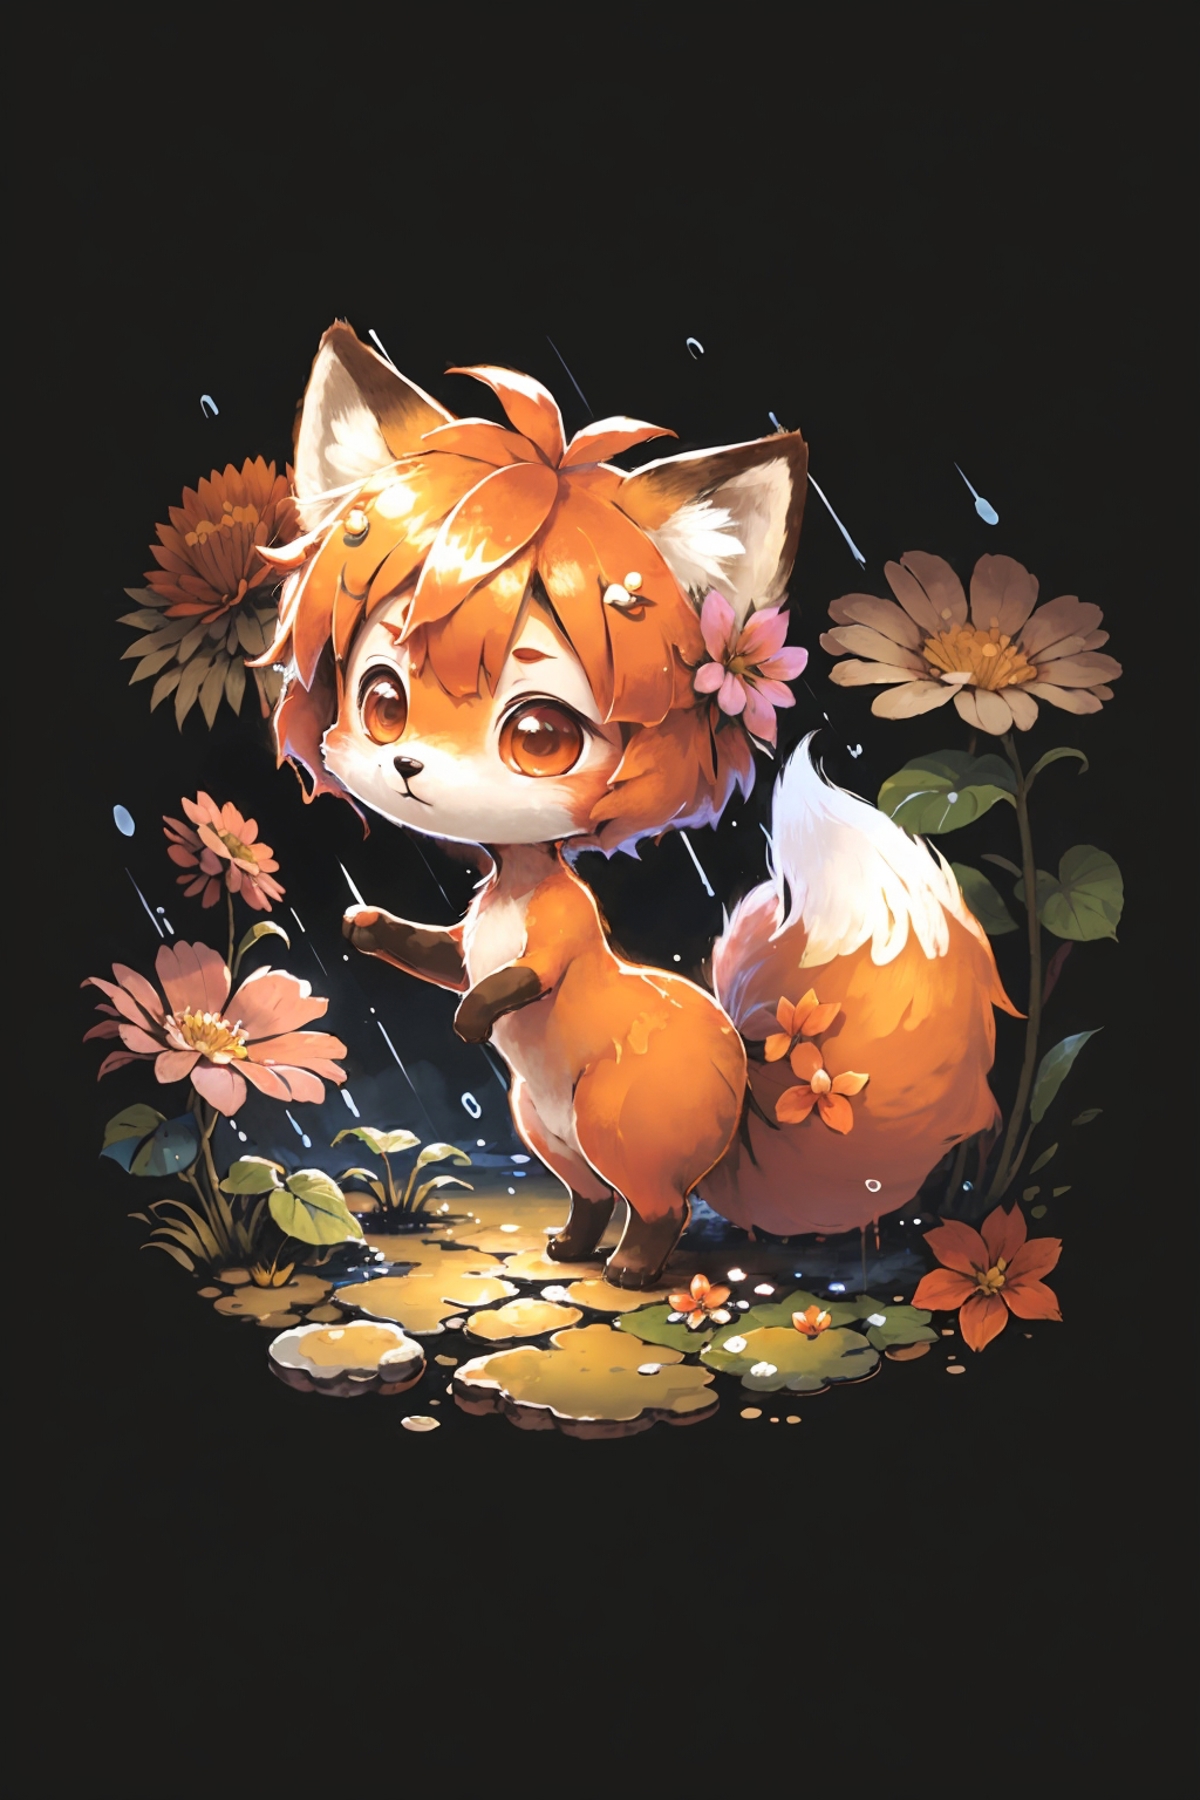 Cute Animals - cute00d image by muf00d